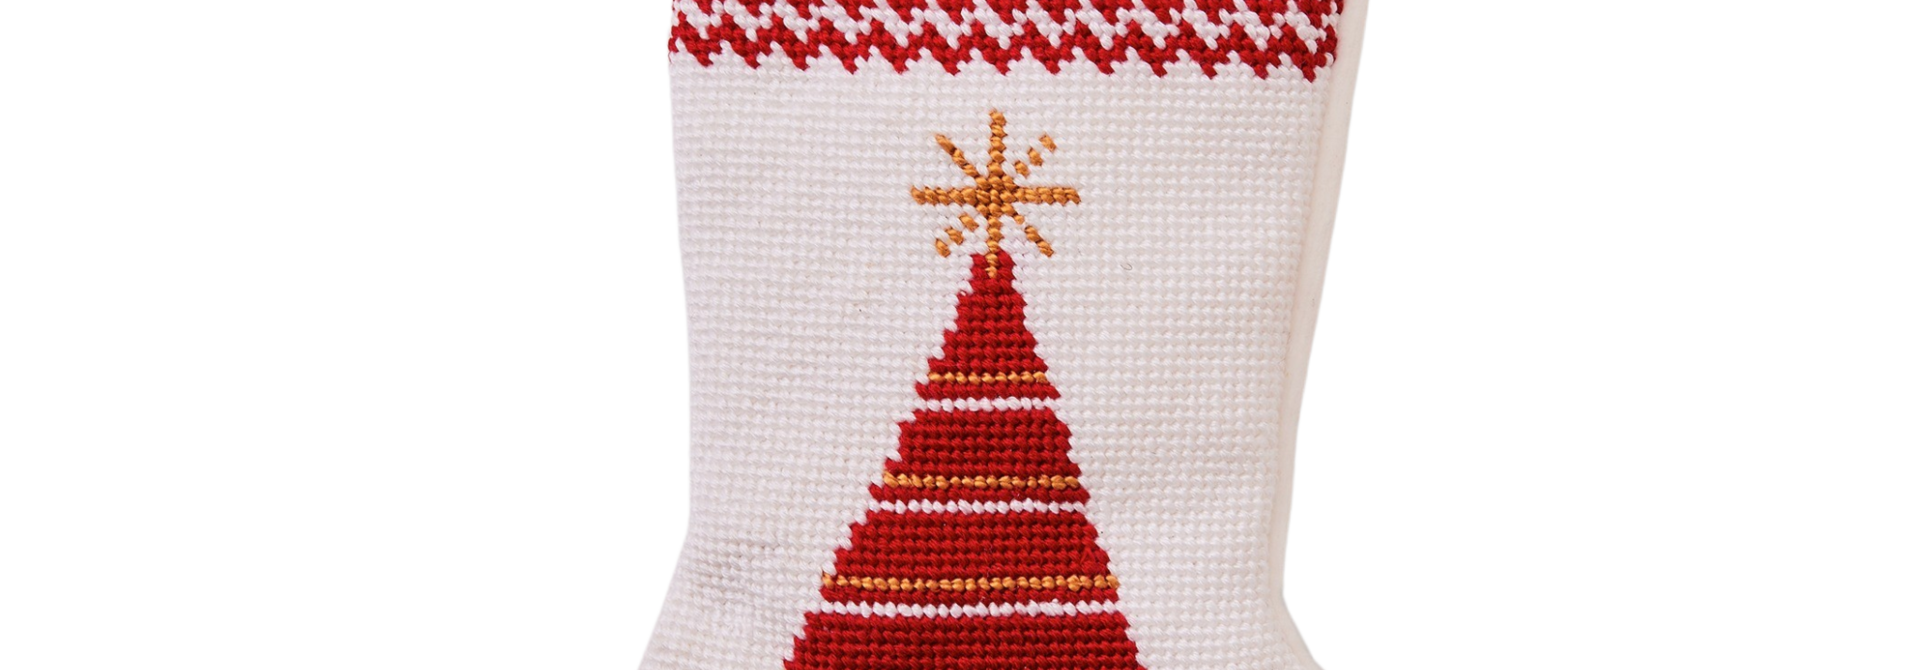 Brightly Shining Tree | The Bauble Stockings Collection - 4.25 Inch x 6 Inch